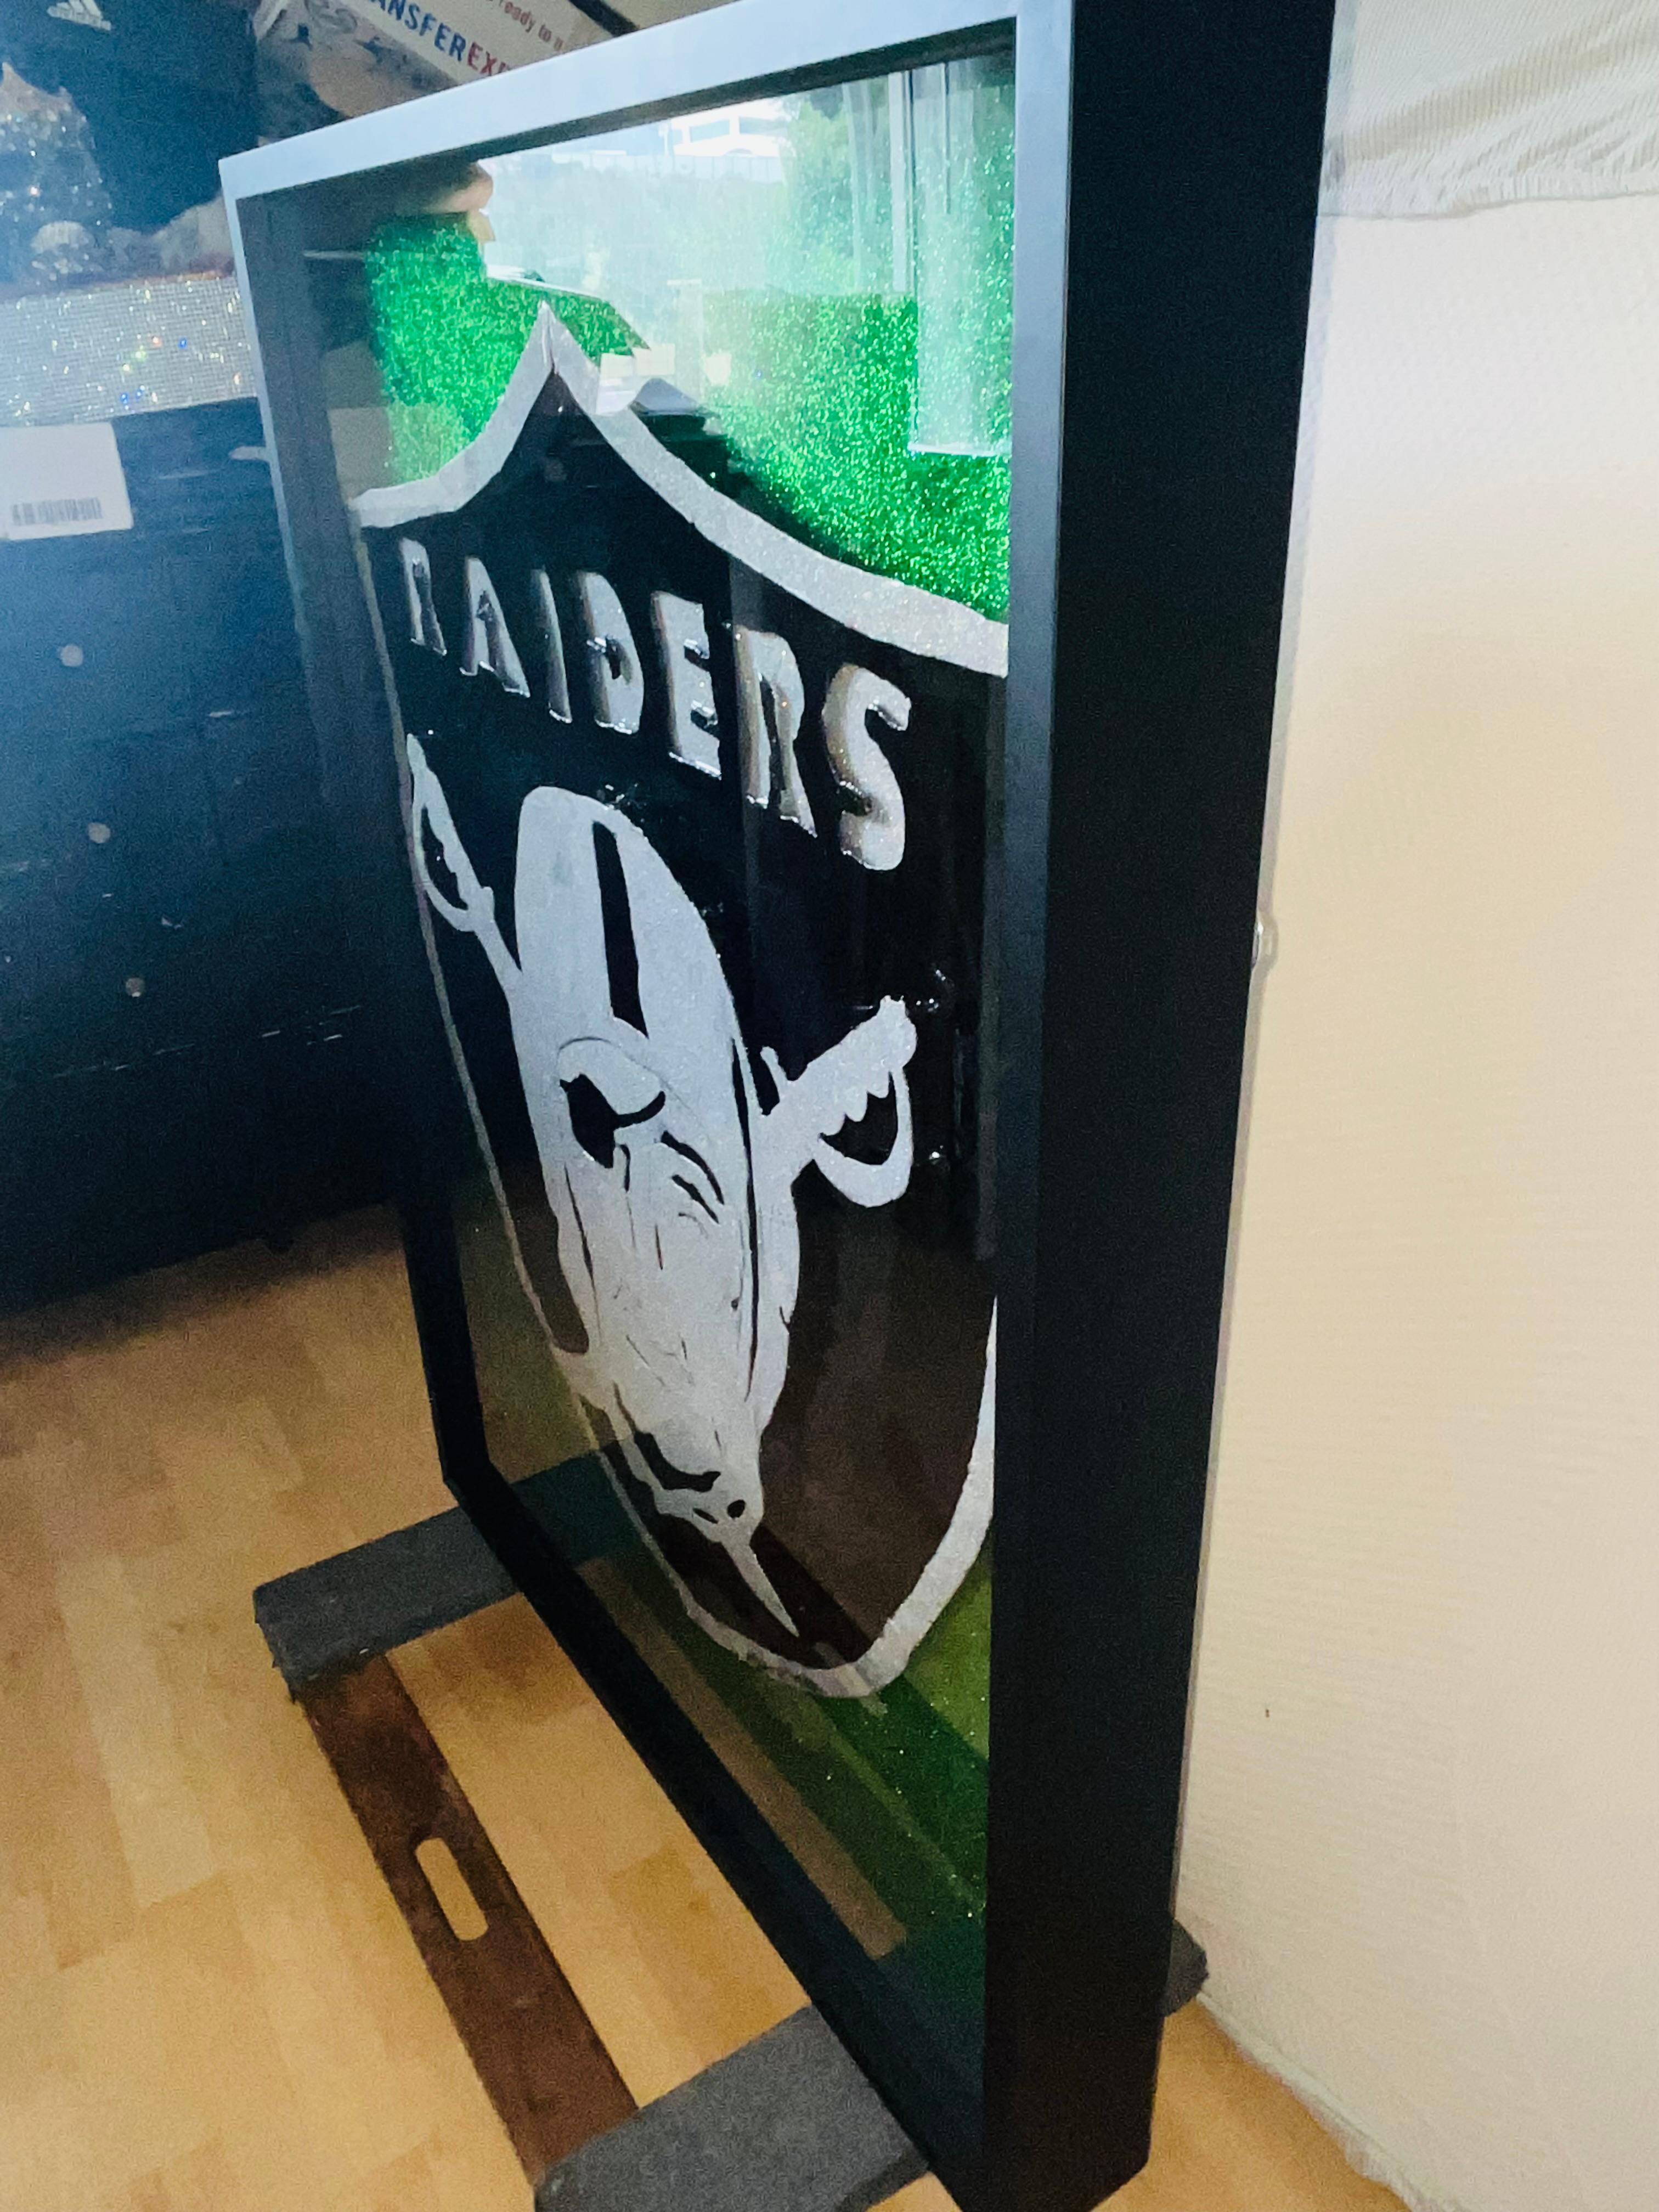 RAIDERS REIGN (Original And One Of A Kind Wall/Floor/Shelve Sculpture) For Sale 3